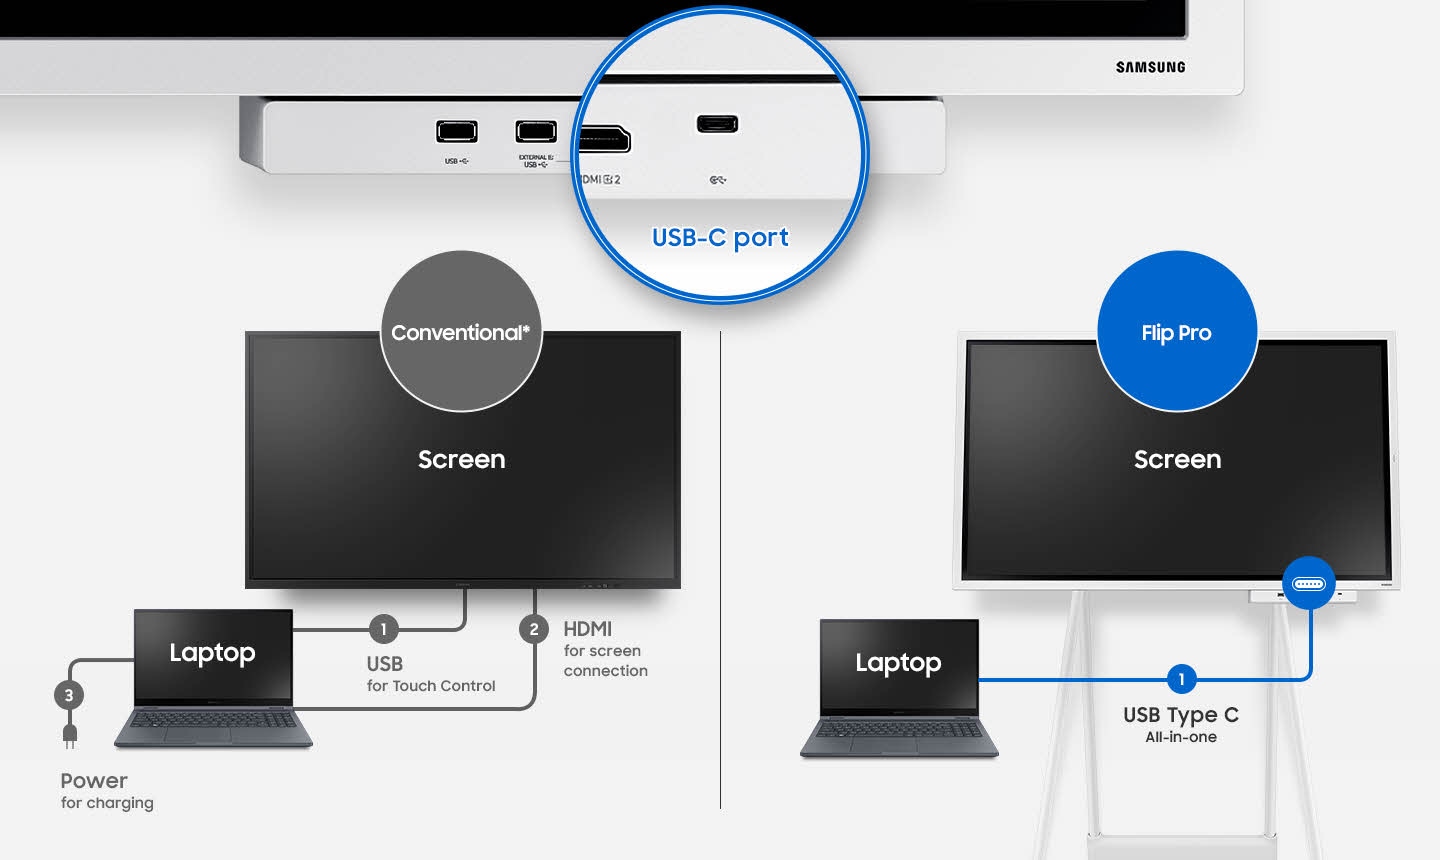 Conventional* products had to connect USB for touch control, HDMI for screen connection, and Power for charging to the laptop to display the screen, but the Flip Pro can be all-in-one through the USB Type-C port.